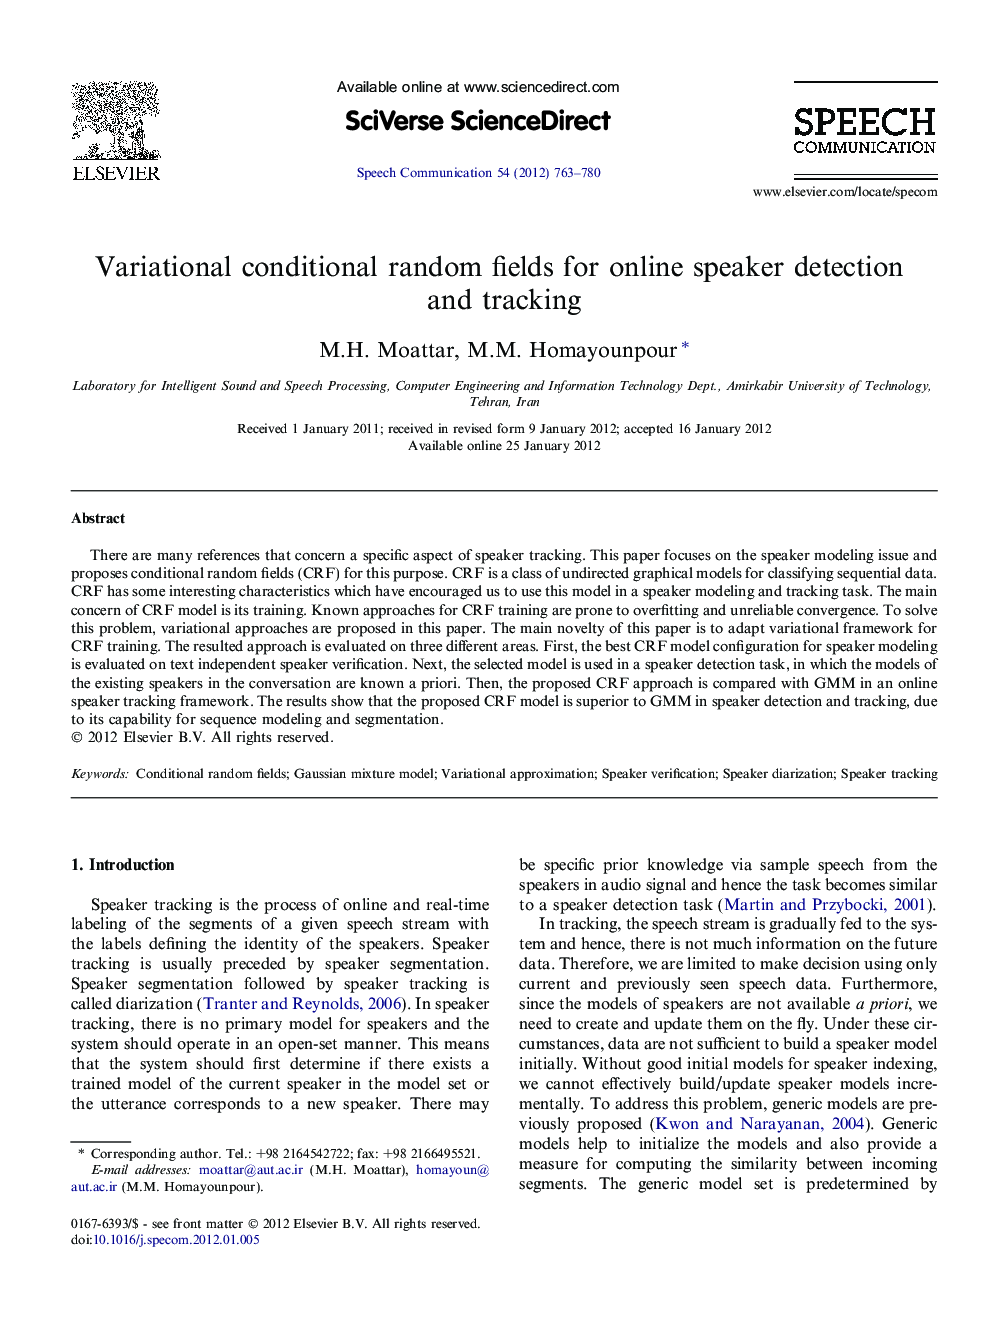 Variational conditional random fields for online speaker detection and tracking